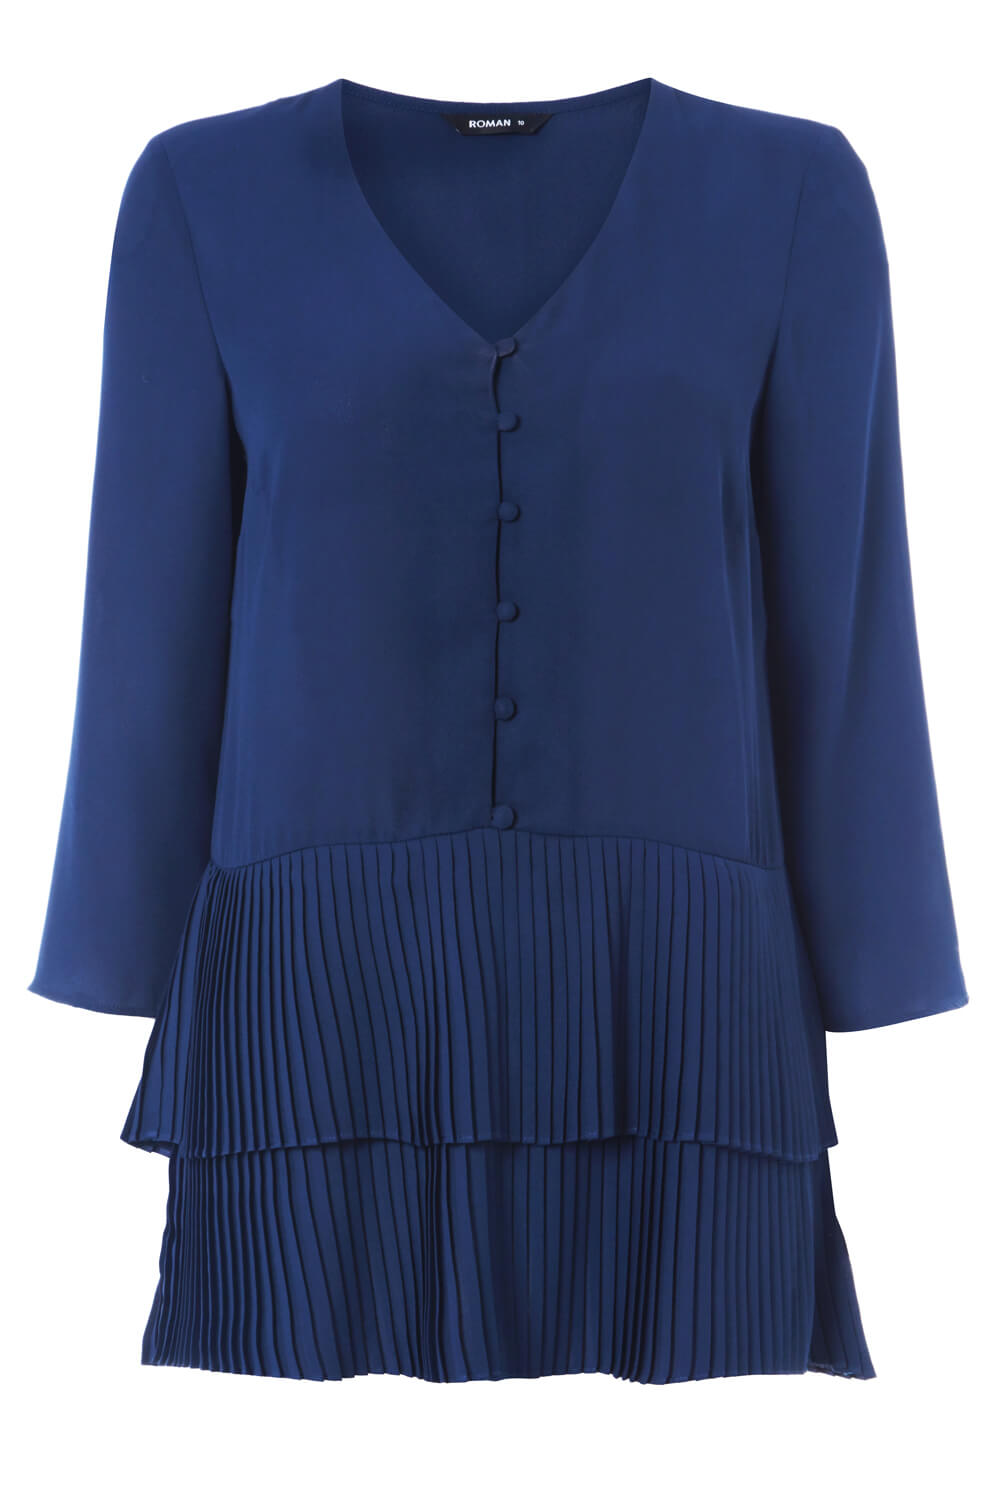 Navy  3/4 Sleeve Pleated Button Front Top, Image 4 of 4